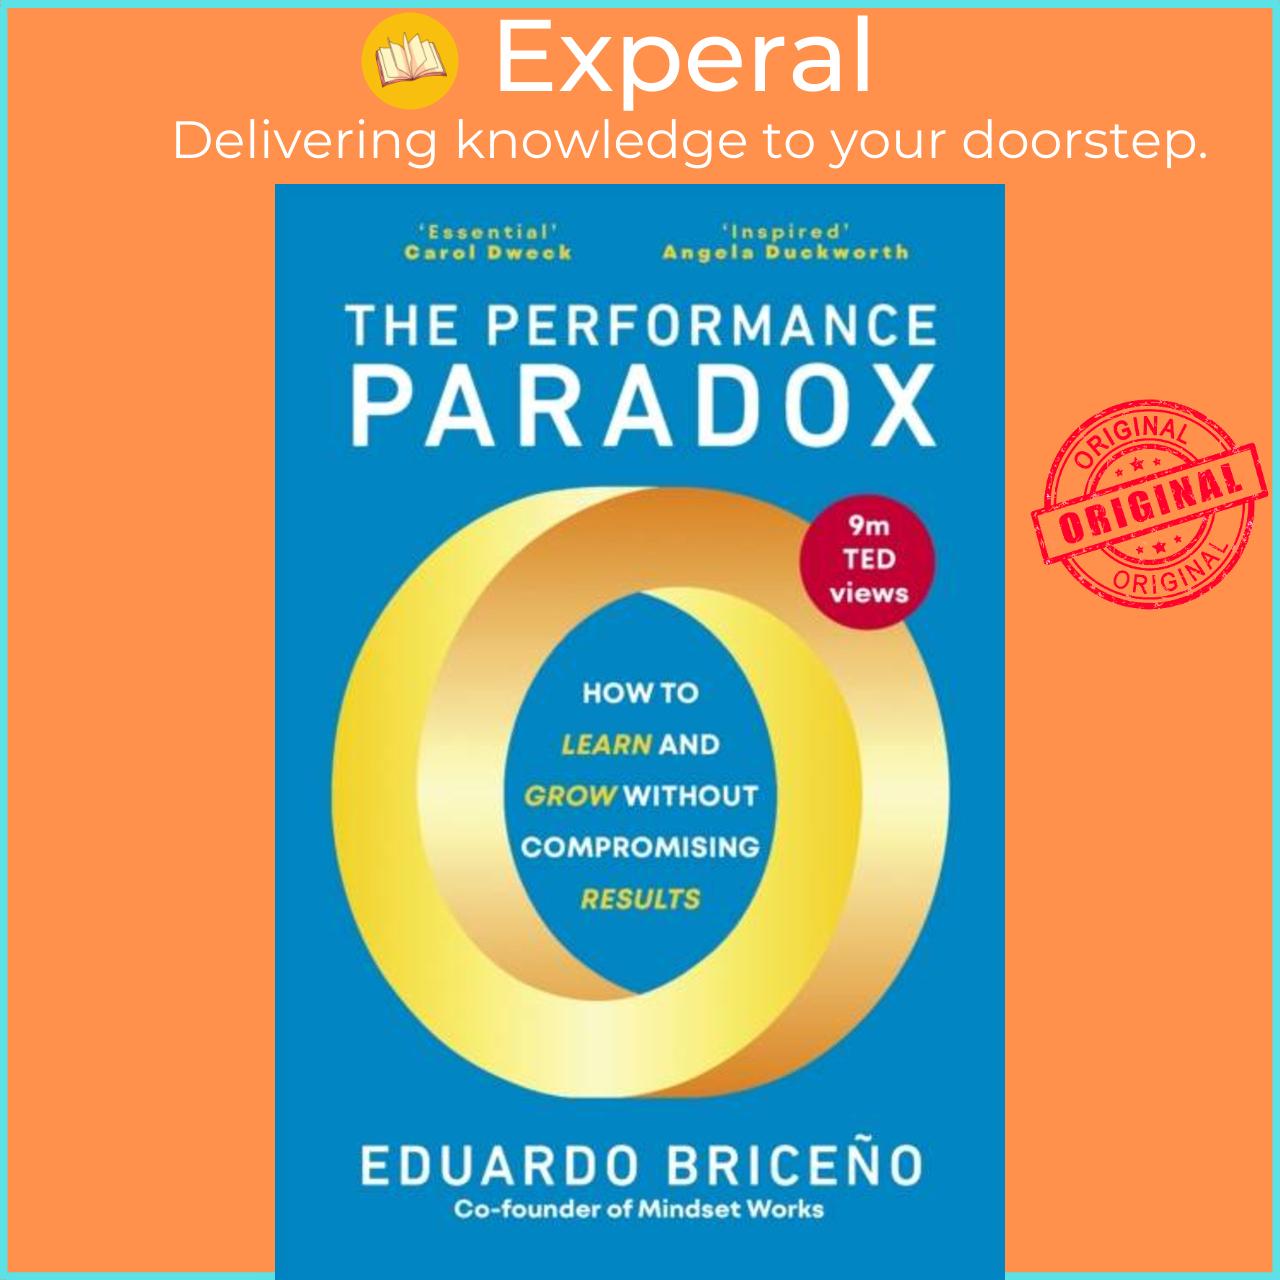 Hình ảnh Sách - The Performance Paradox - How to Learn and Grow Without Compromising R by Eduardo Briceno (UK edition, hardcover)